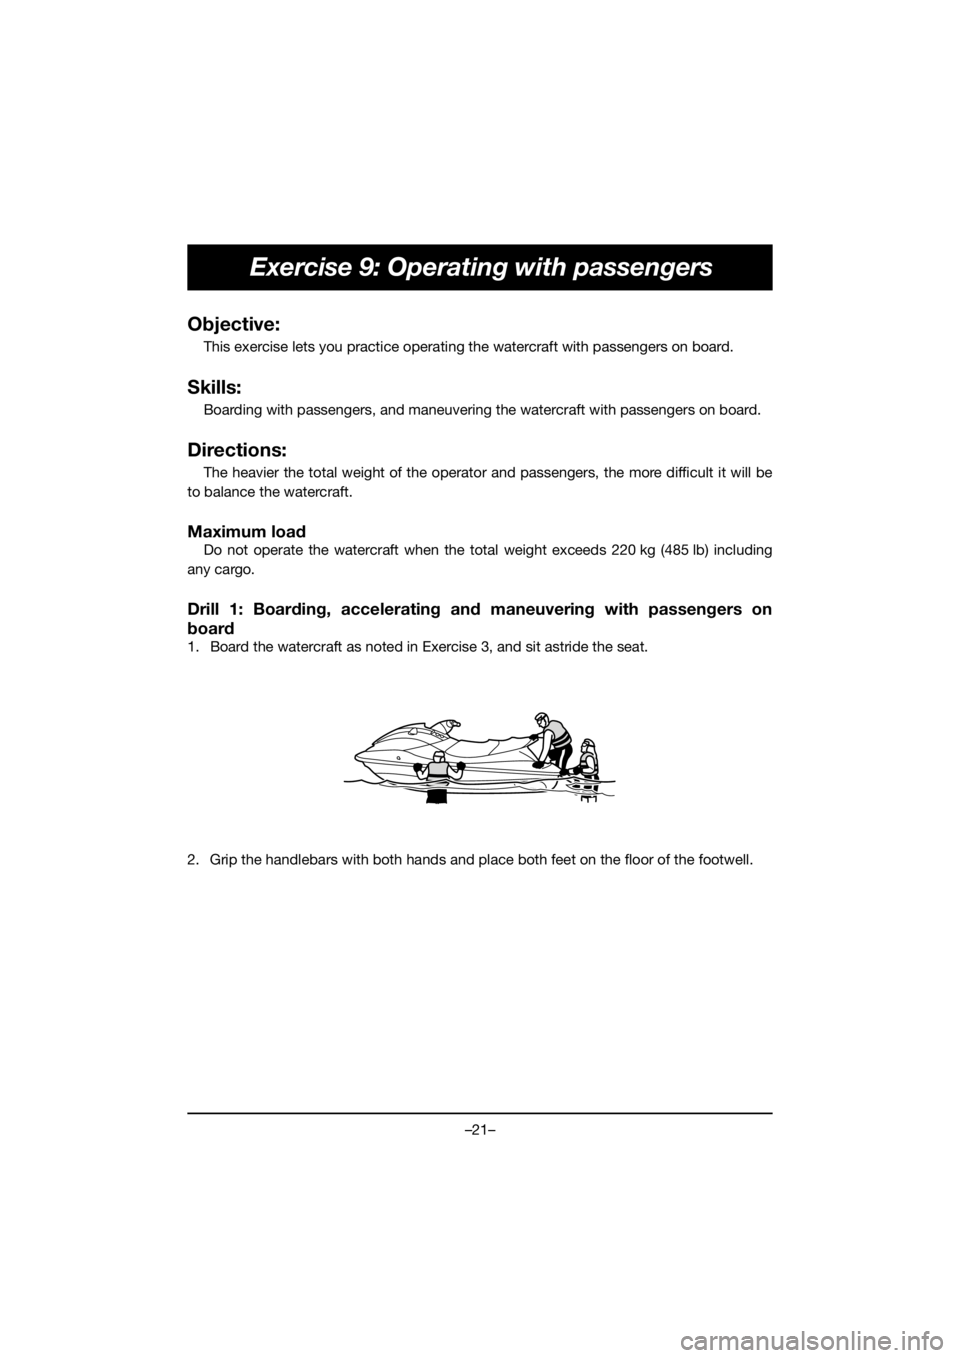 YAMAHA EX SPORT 2019  Notices Demploi (in French) –21–
Exercise 9: Operating with passengers
Objective:
This exercise lets you practice operating the watercraft with passengers on board.
Skills:
Boarding with passengers, and maneuvering the water